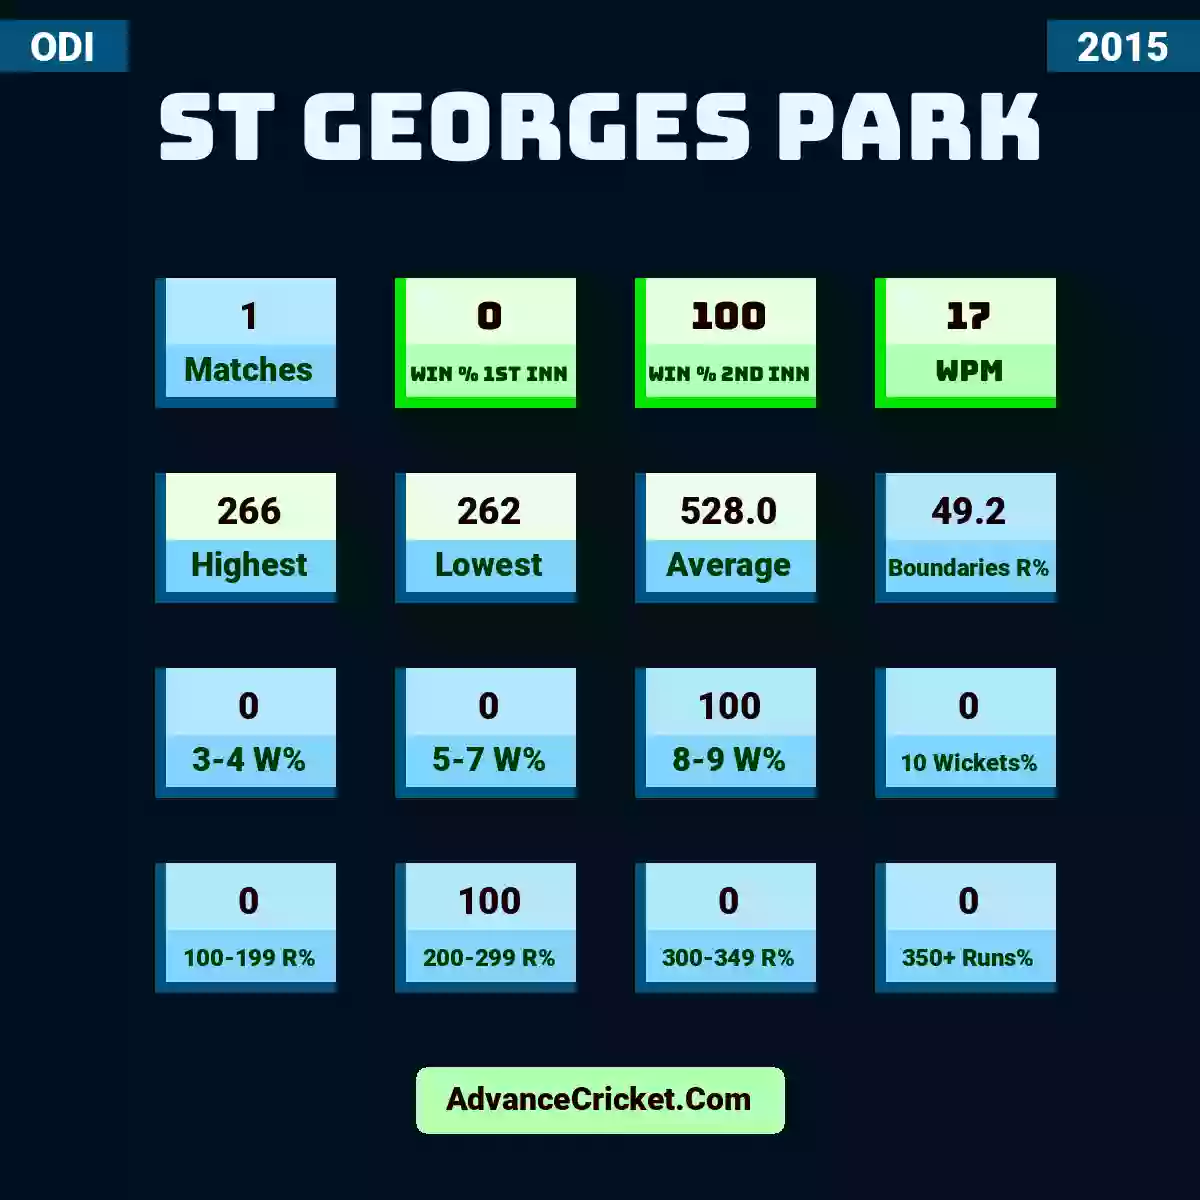 Image showing St Georges Park with Matches: 1, Win % 1st Inn: 0, Win % 2nd Inn: 100, WPM: 17, Highest: 266, Lowest: 262, Average: 528.0, Boundaries R%: 49.2, 3-4 W%: 0, 5-7 W%: 0, 8-9 W%: 100, 10 Wickets%: 0, 100-199 R%: 0, 200-299 R%: 100, 300-349 R%: 0, 350+ Runs%: 0.